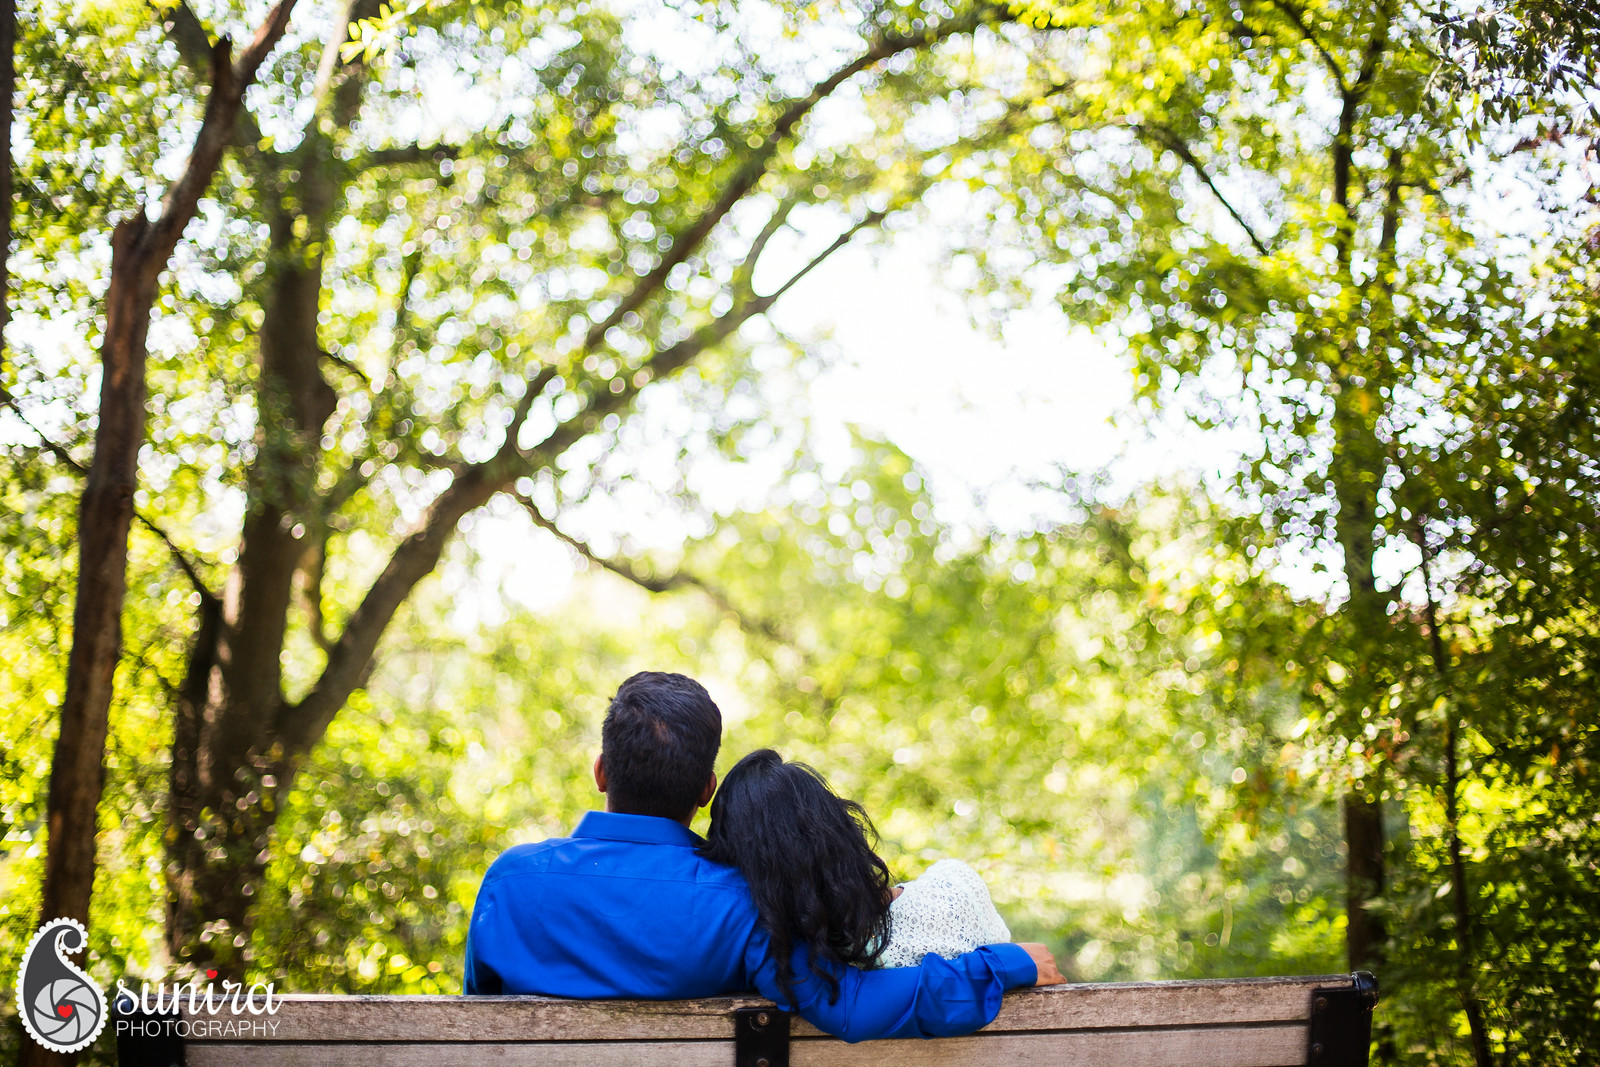 Fareeba and Jaheen Piedmont Park and Atlantic Station Engagement Photography